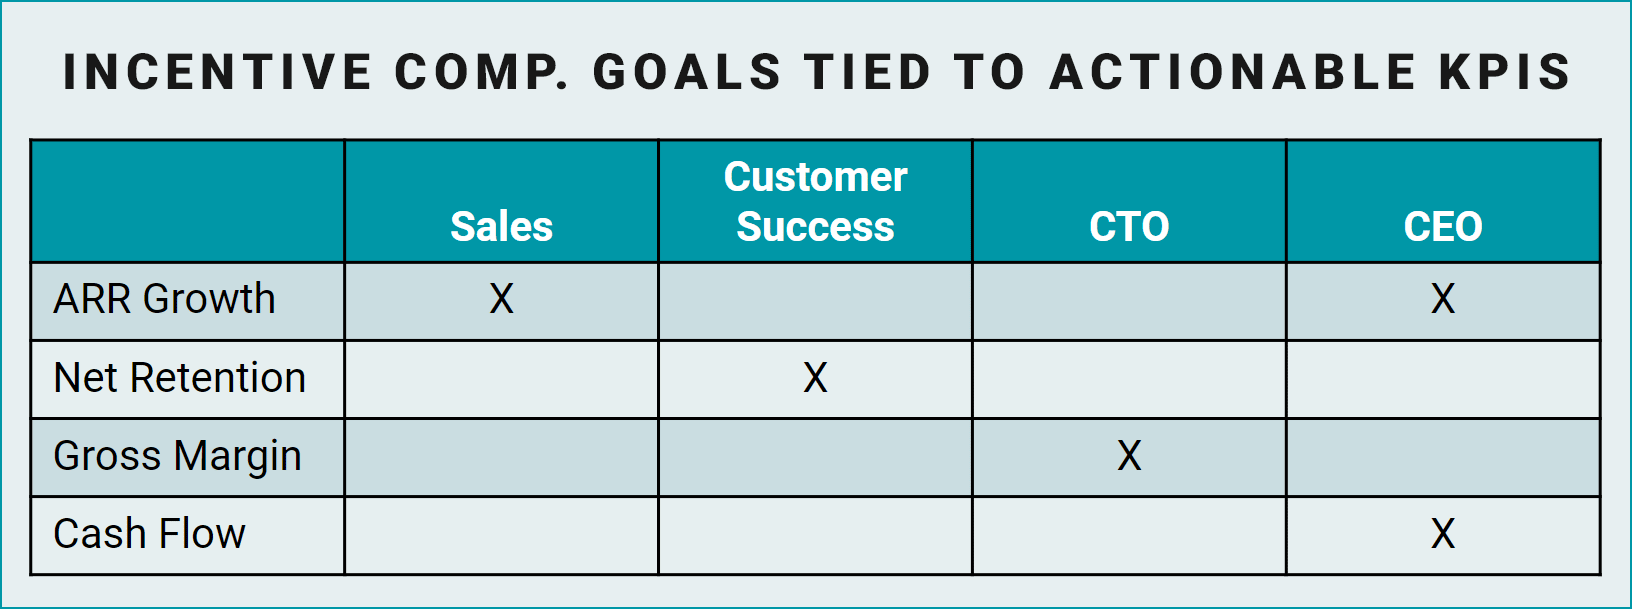 Table showing examples of department level incentive compensation goals tied to actionable KPIs